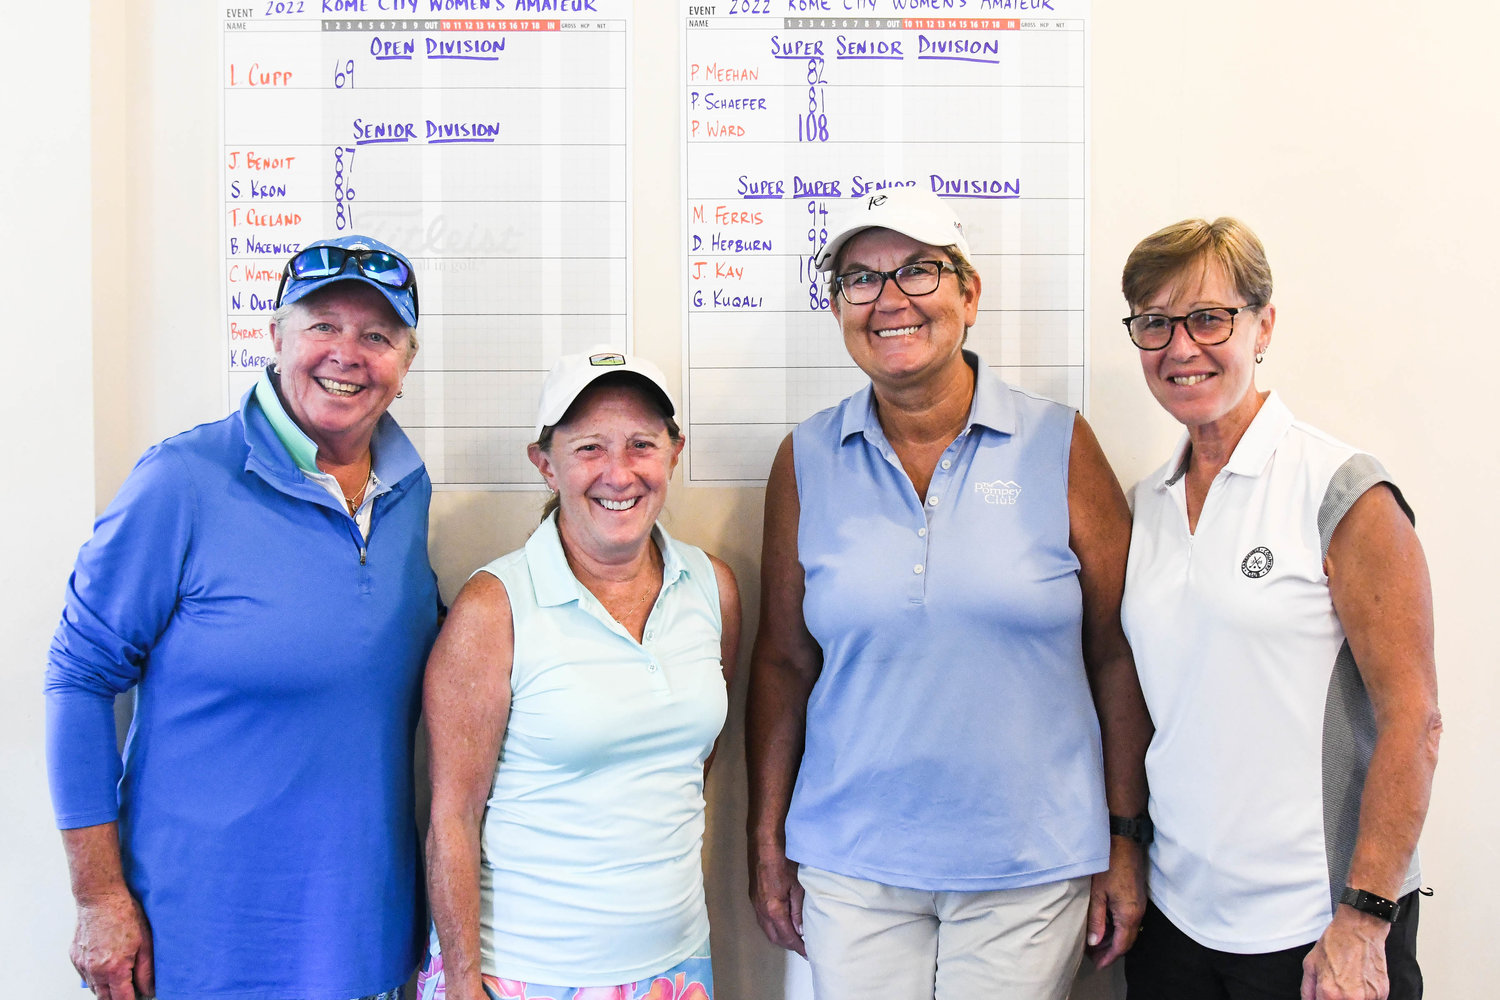 There were 16 participants in the 53rd Rome City Women’s Amateur Golf Championship Monday at Rome Country Club. They included, from left: Patty Schaefer, Pam Meehan, Jo Benoit and Shelley Kron. Schaefer’s 81 was the top score in the super senior division.